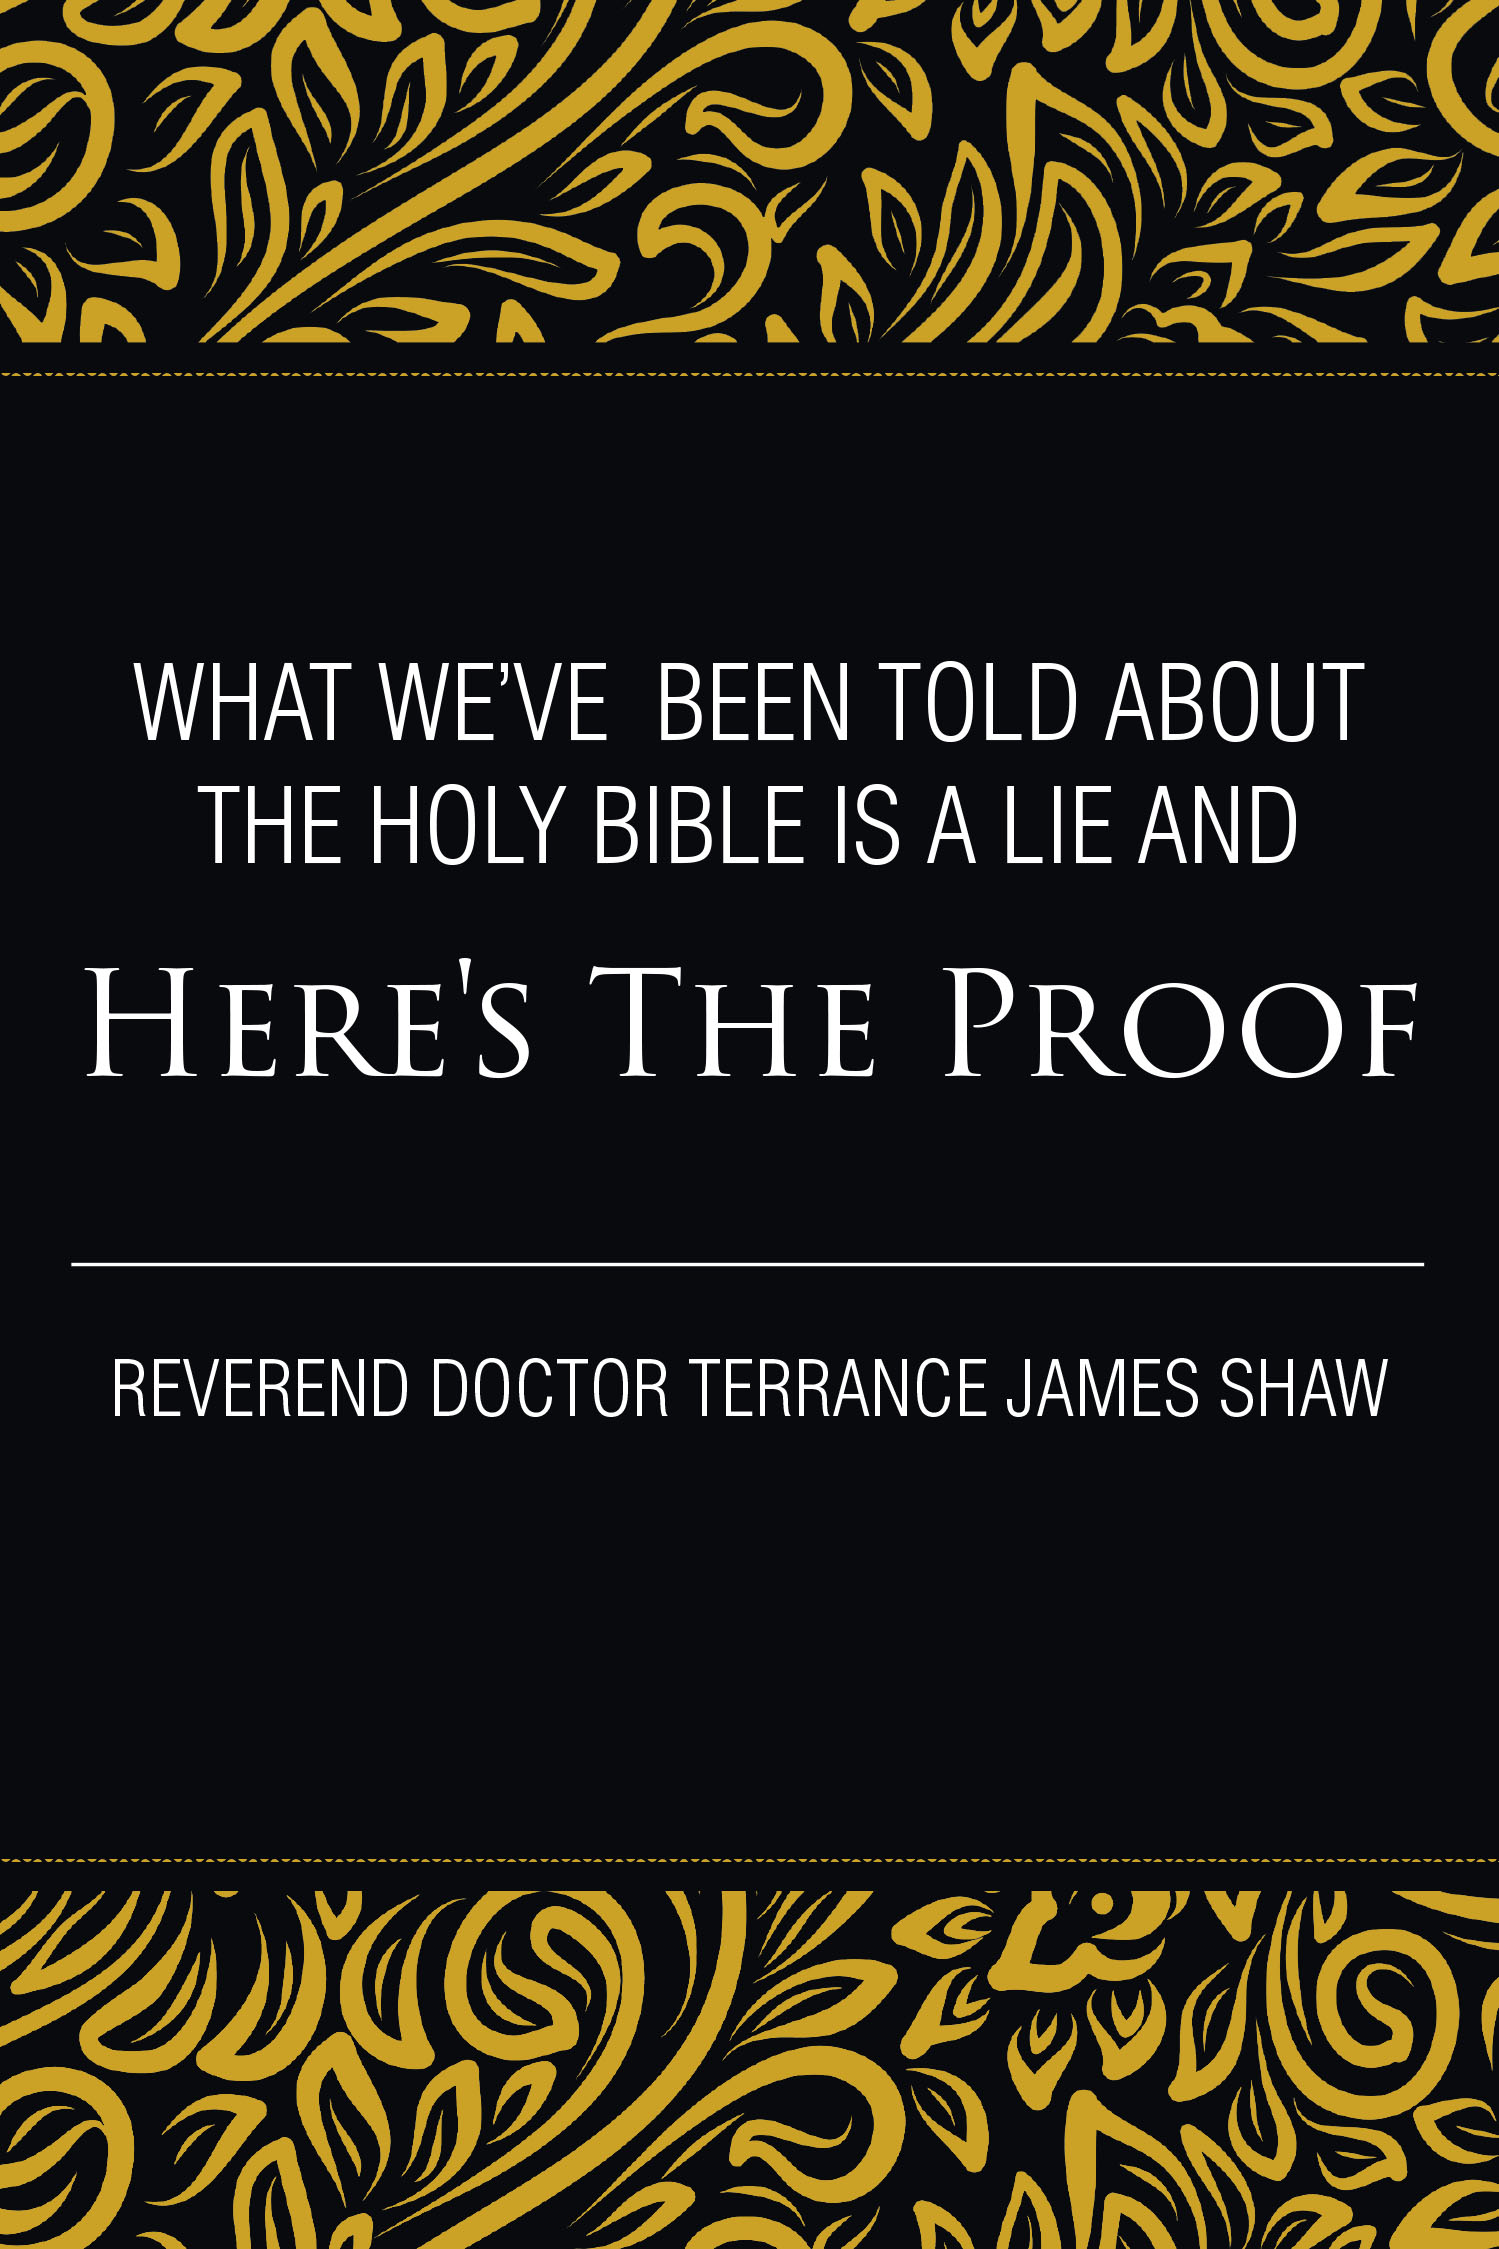 Author Reverend Doctor Terrance James Shaw’s New Book “What We've Been Told about the Holy Bible Is a Lie And Here's the Proof” Challenges Common Beliefs About the Bible